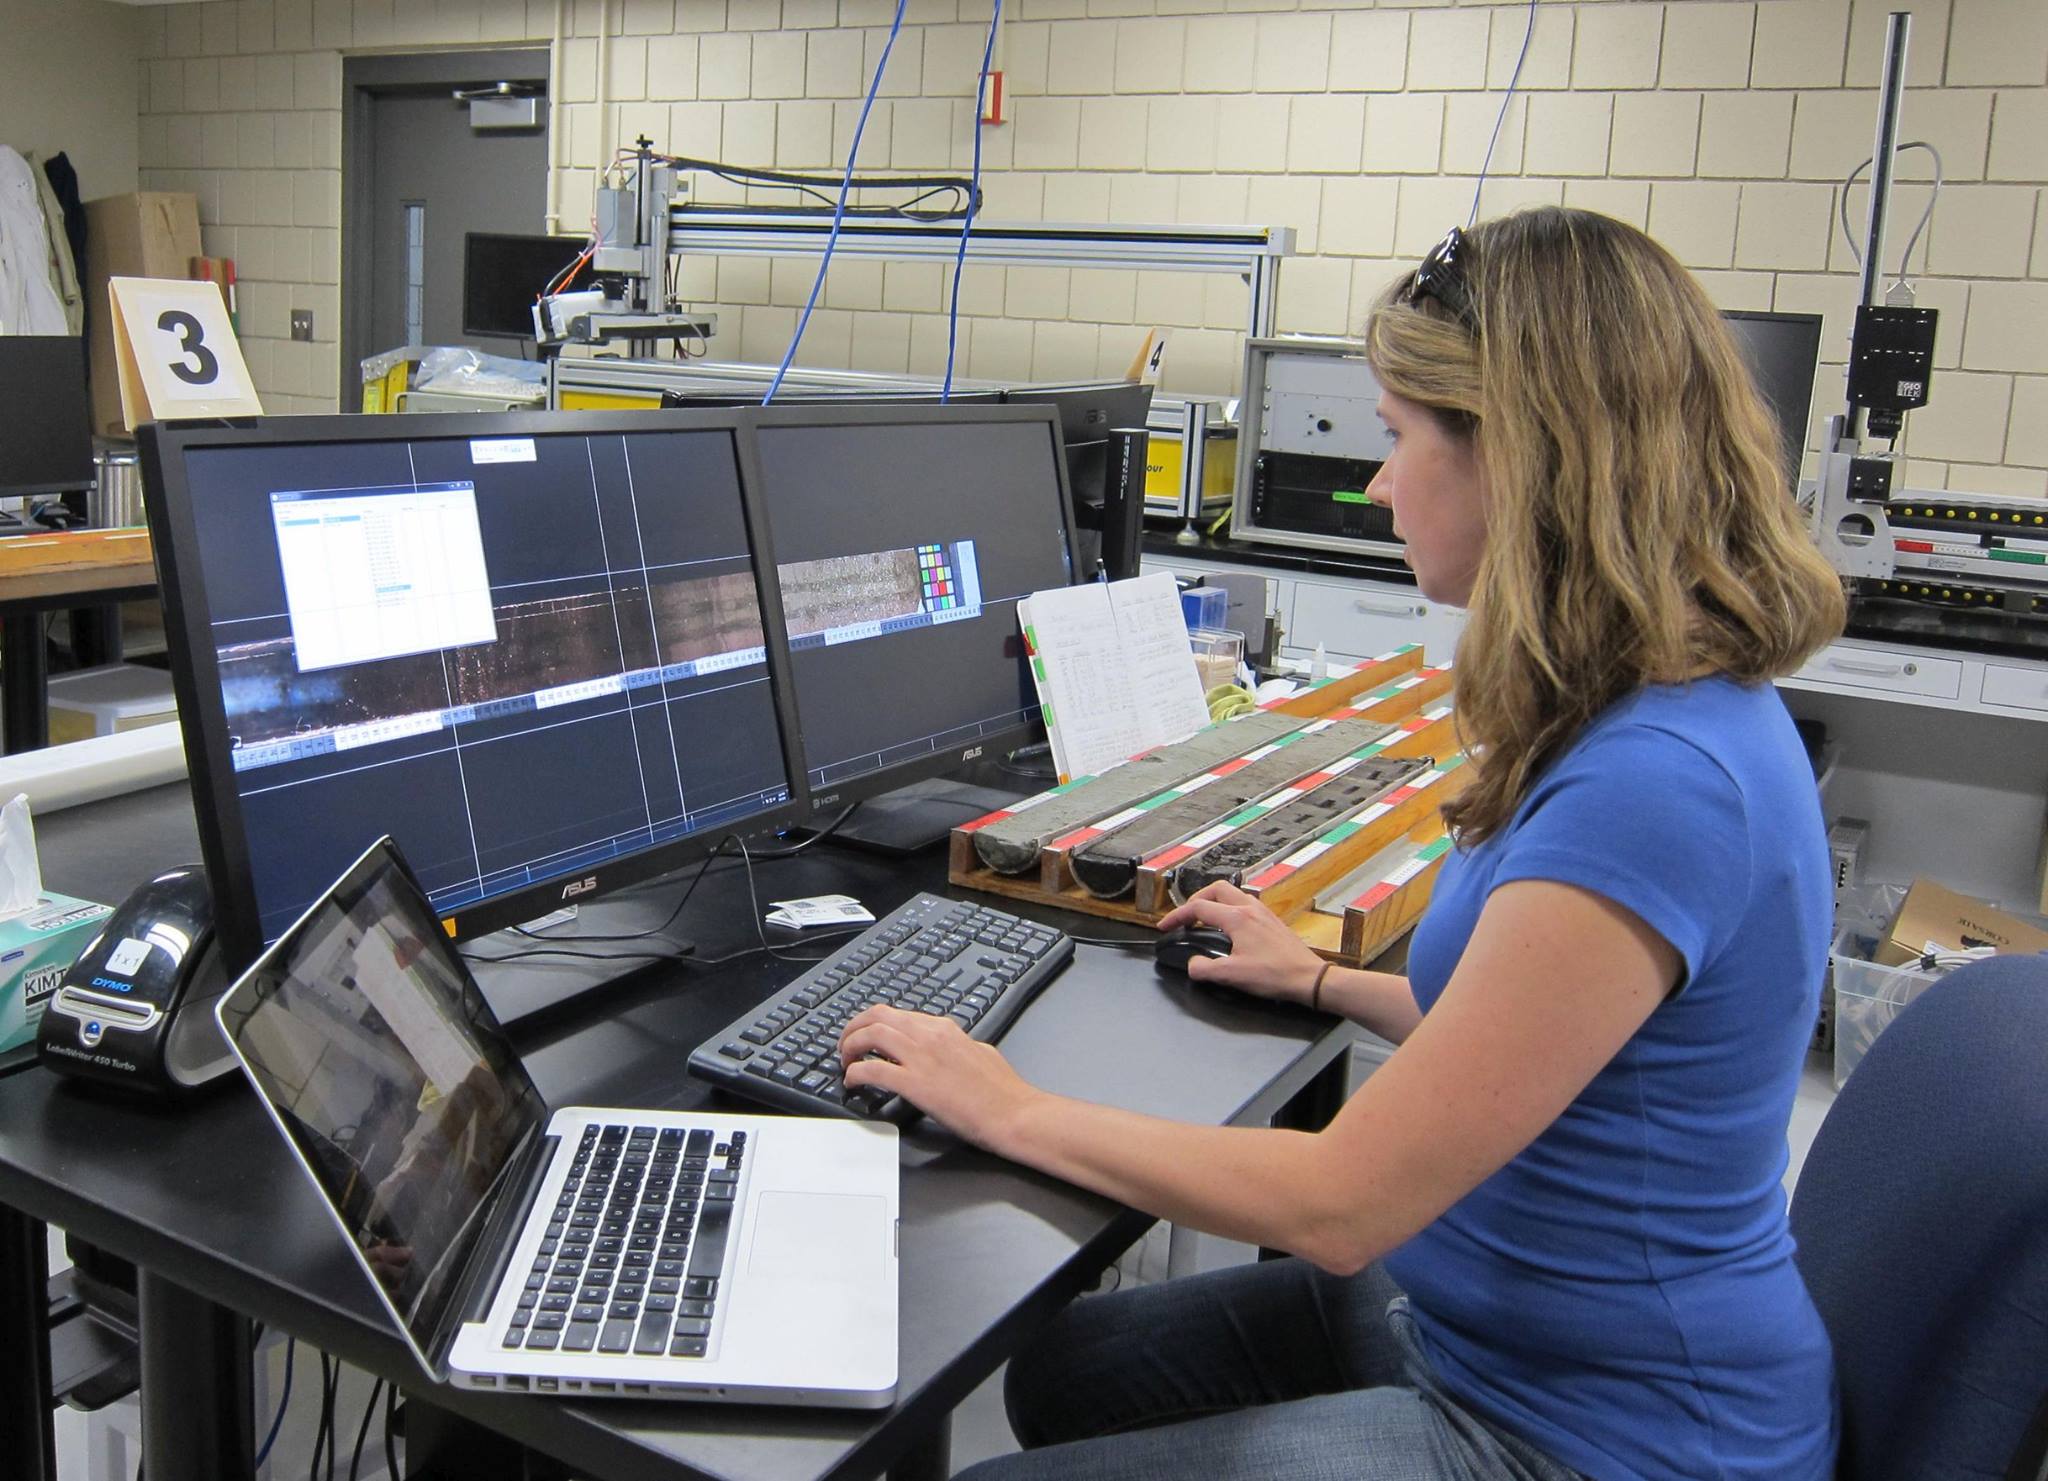 woman sitting in front of computers with core images displayed